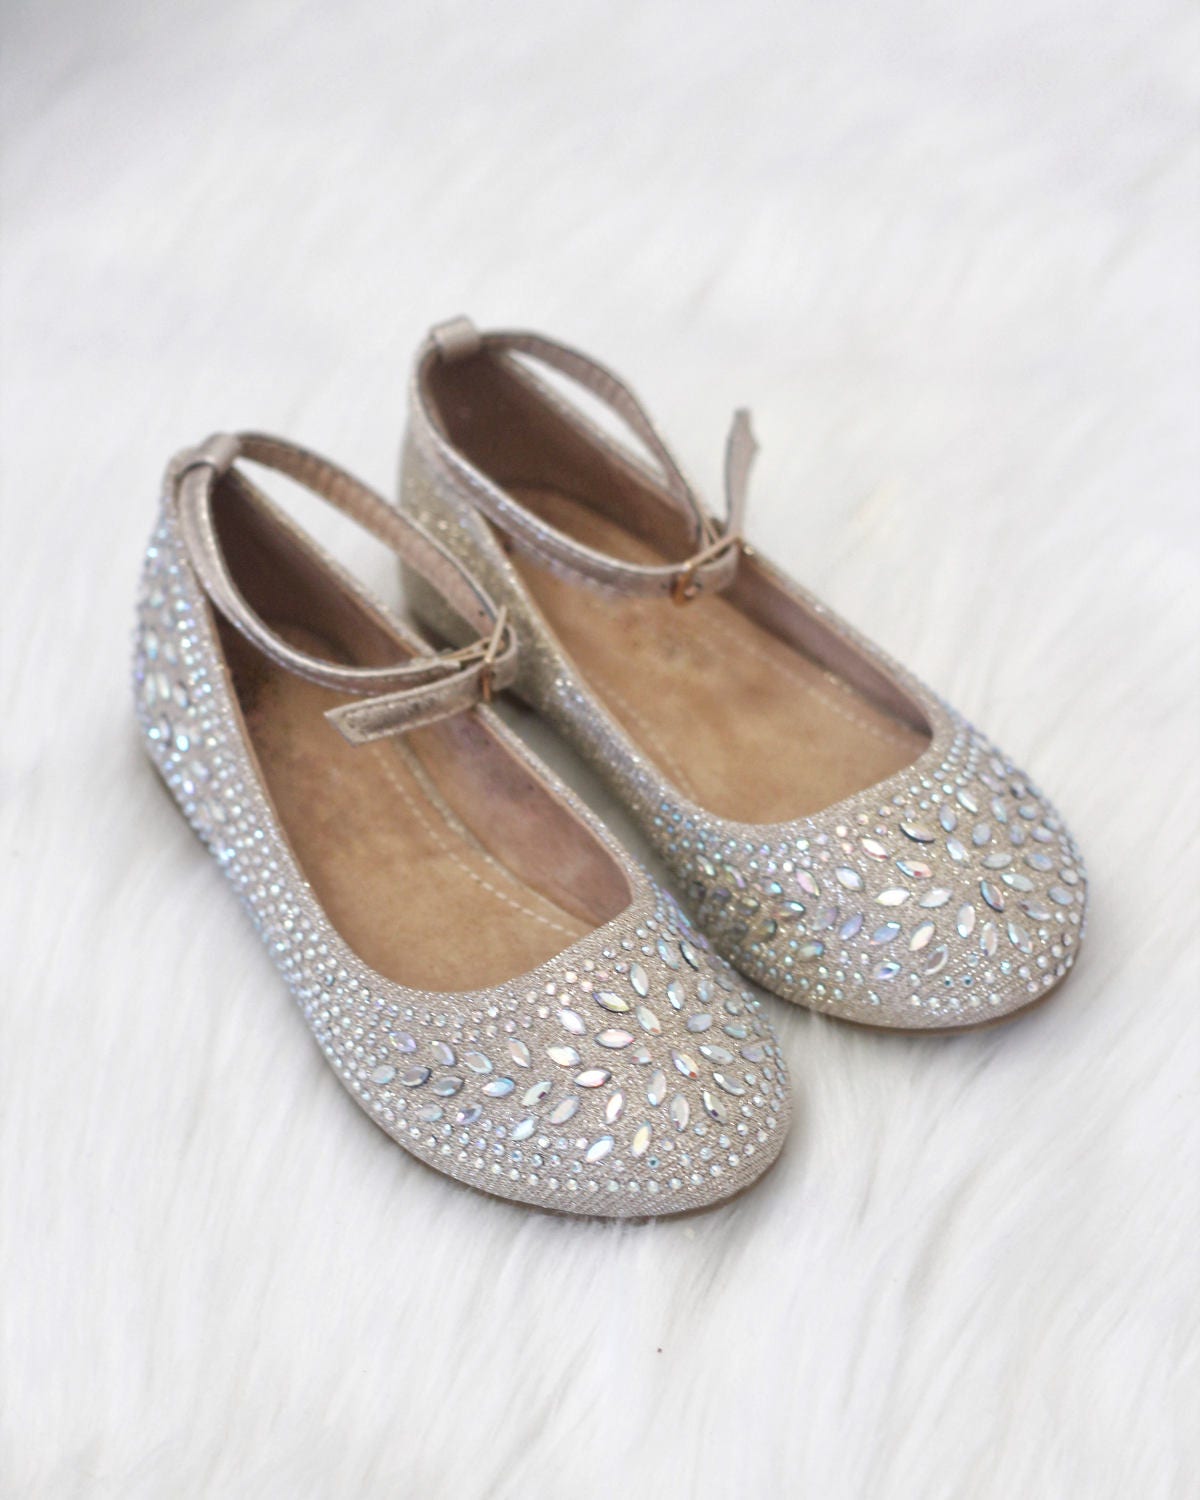 SALE Kids Shoes GOLD Shimmer satin with rhinestone ballet